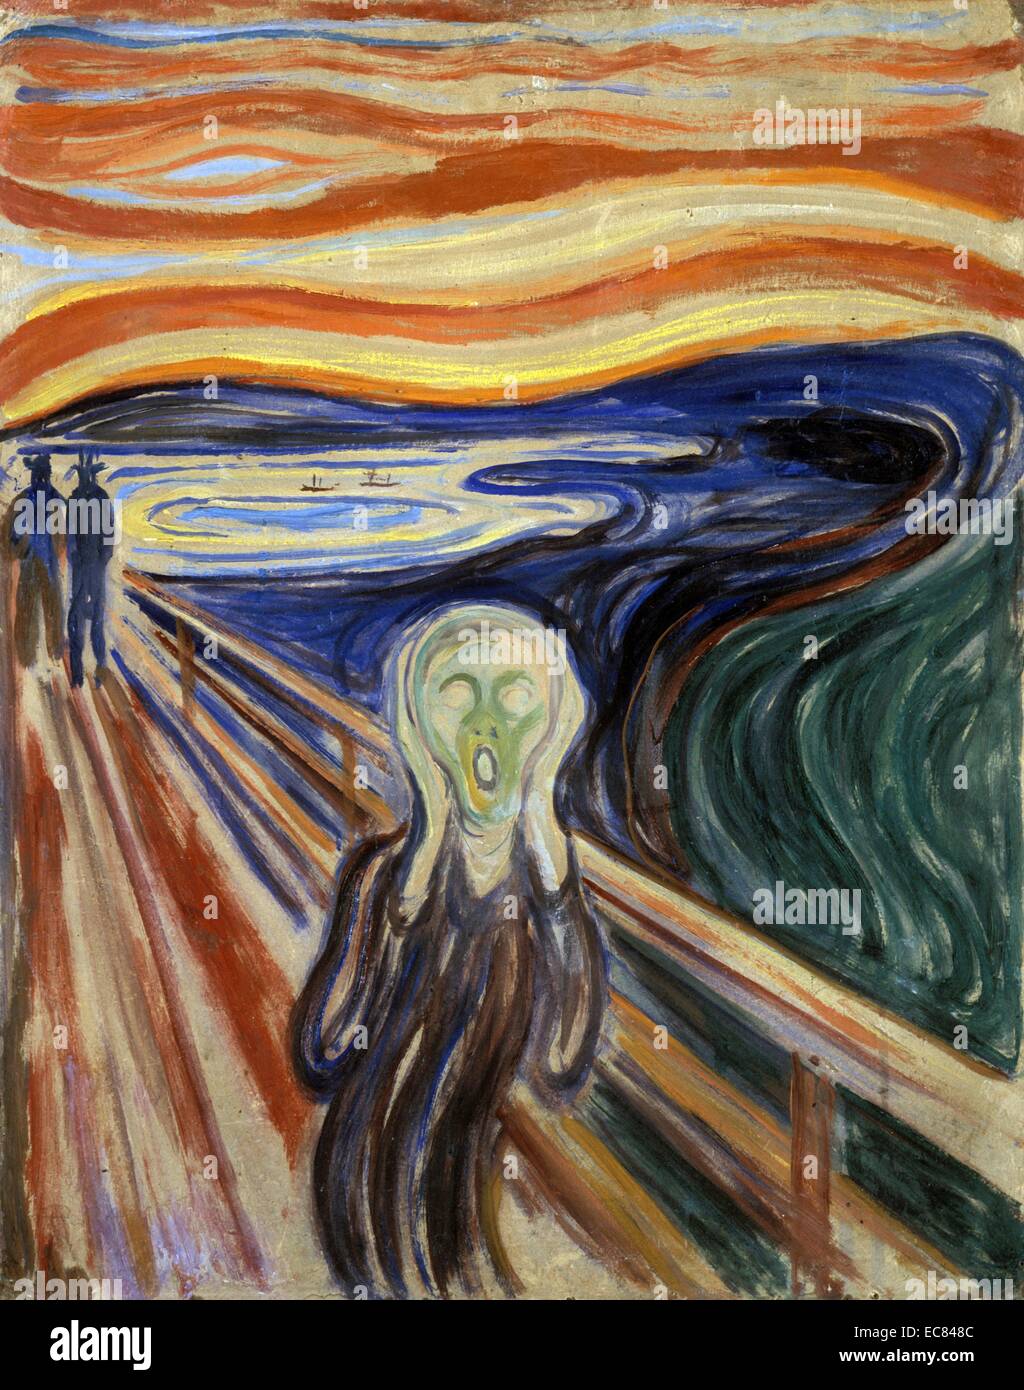 Work entitled The Scream by the Norwegian artist Edvard Munch (1863-1944). This work was produced in 1893. Stock Photo